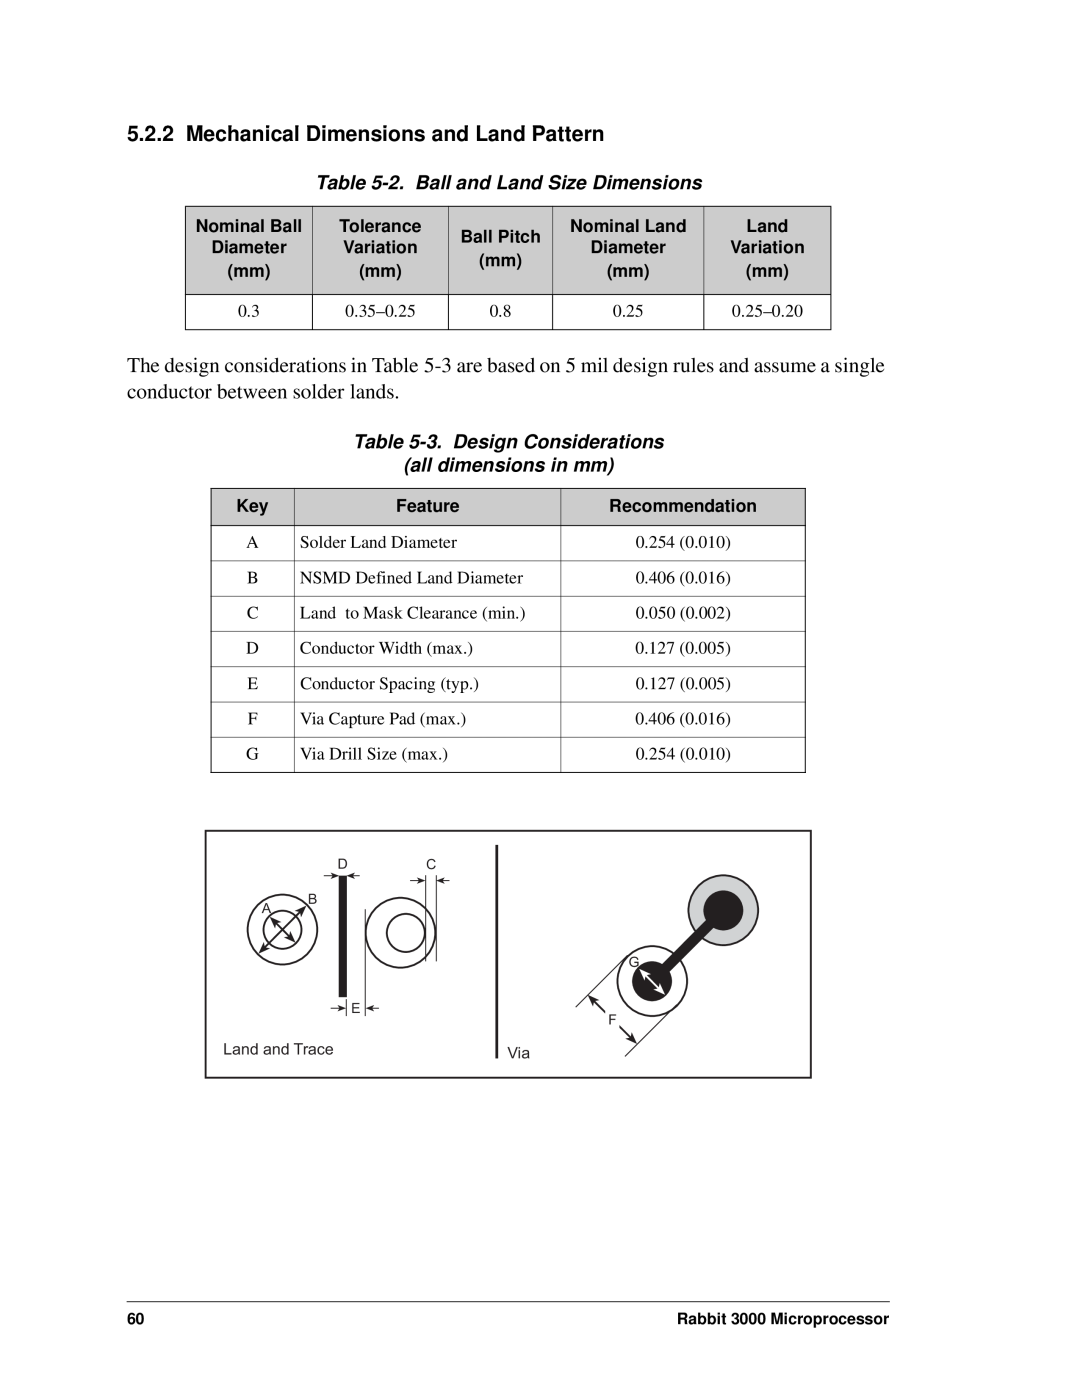 Jameco Electronics 2000 Mechanical Dimensions and Land Pattern, 2.Ball and Land Size Dimensions, 3.Design Considerations 